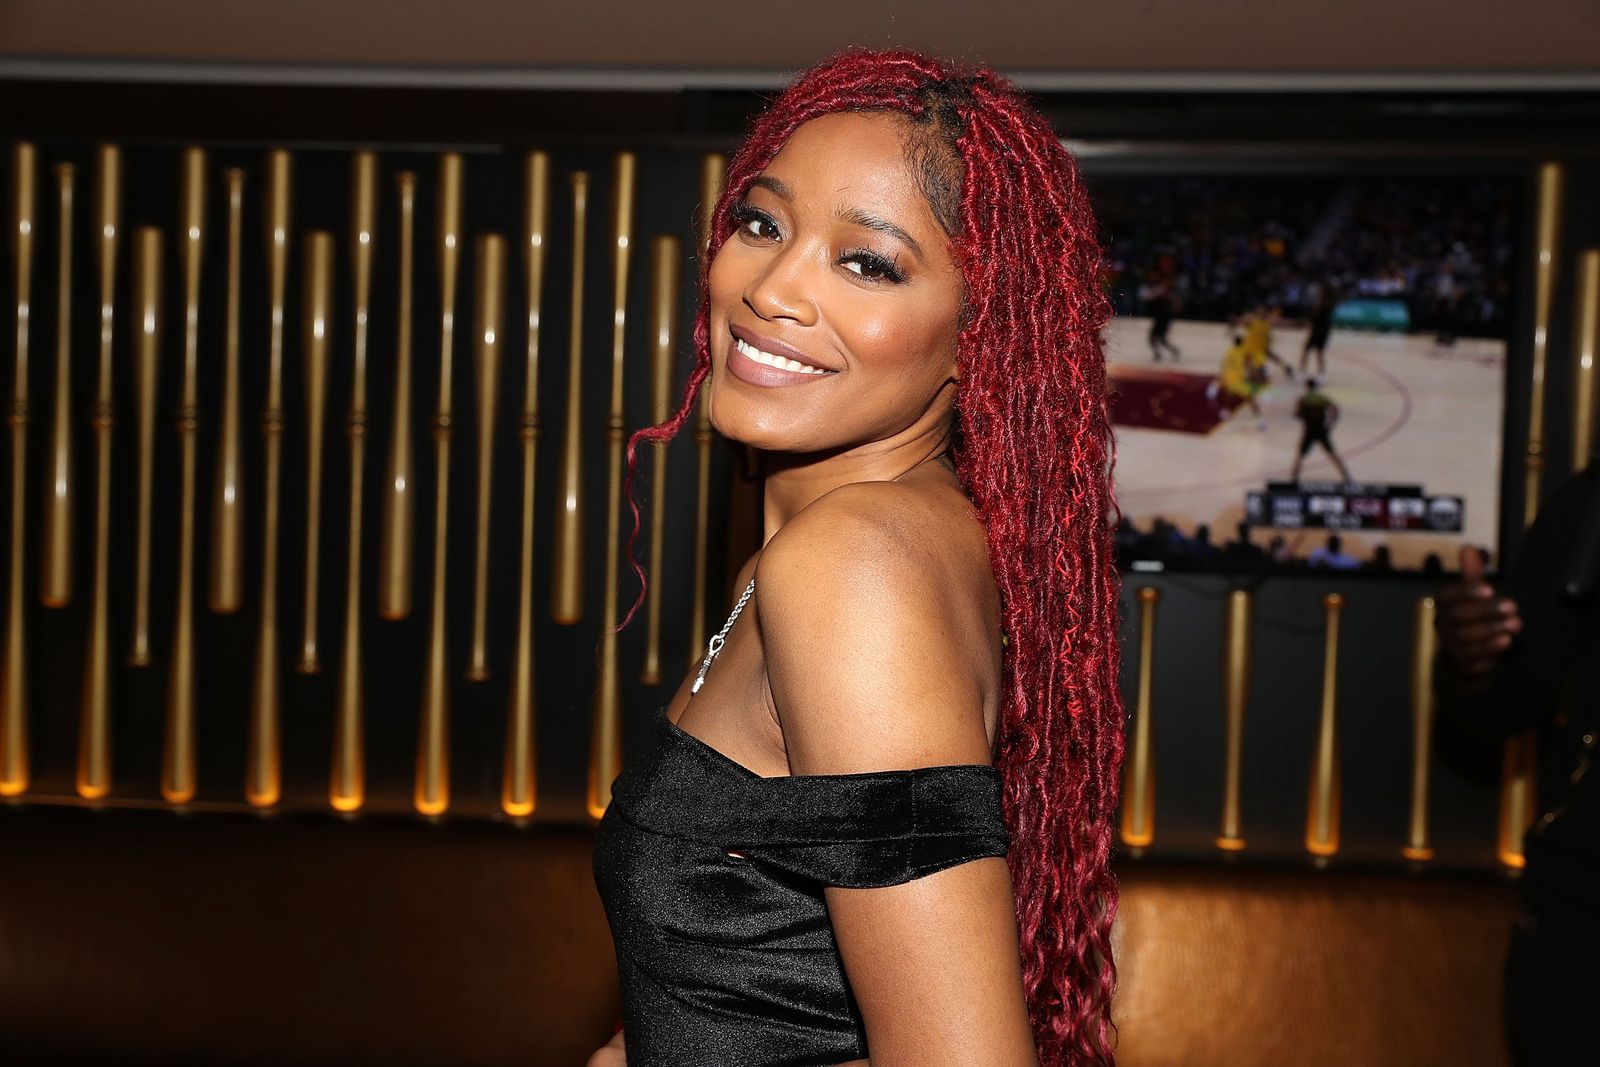 Keke Palmer attends her listening party at 40 / 40 Club on April 18, 2018 | Photo: Getty Images